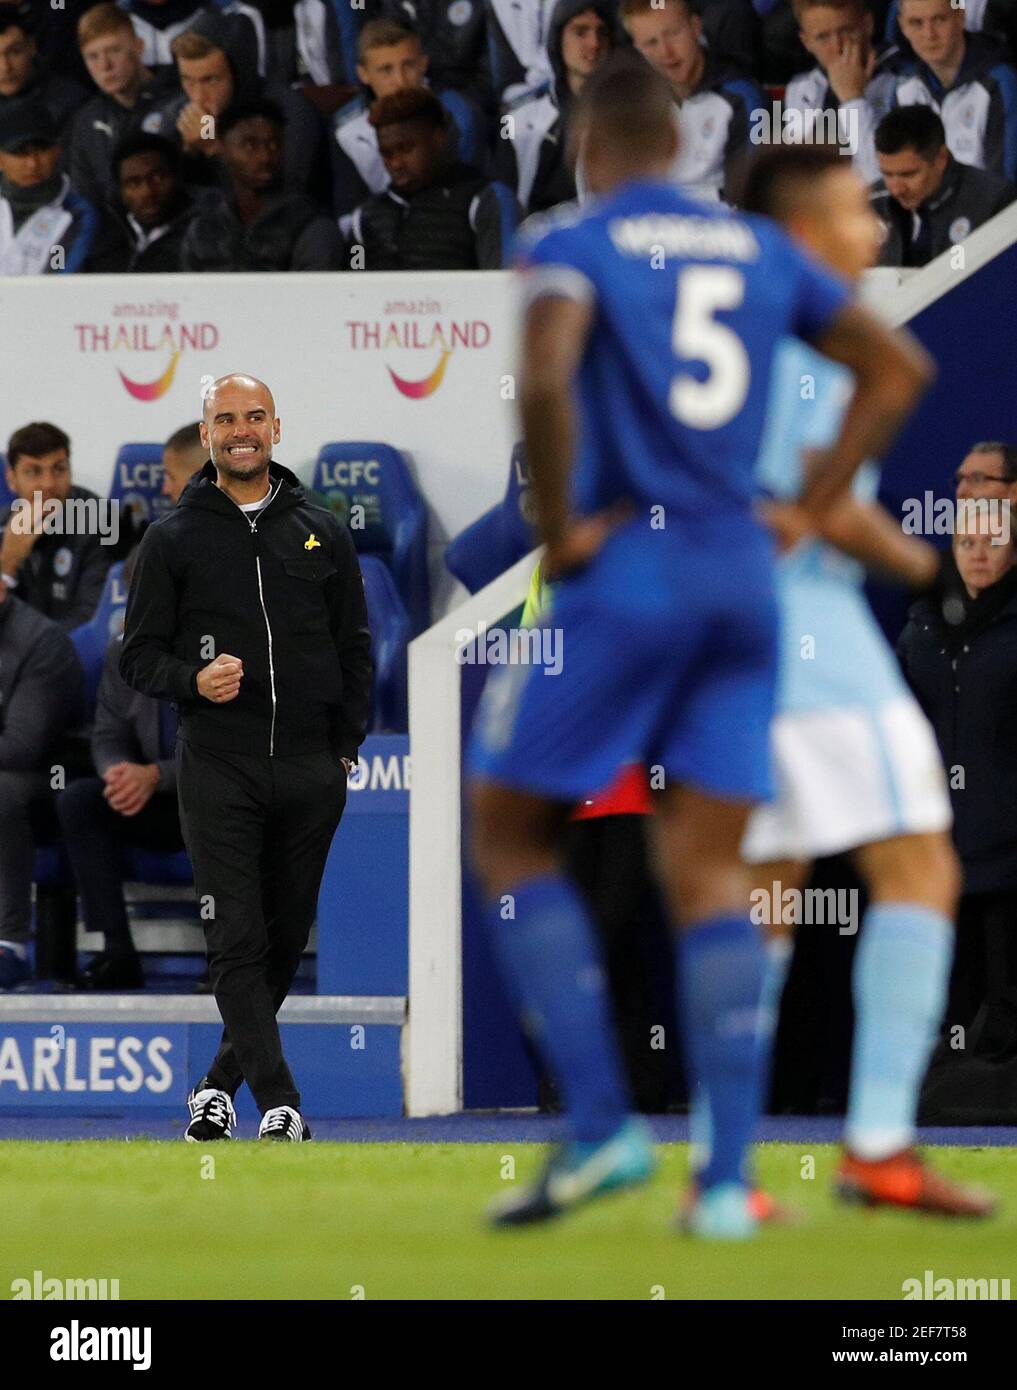 Soccer Football - Premier League - Leicester City vs Manchester City - King Power Stadium, Leicester, Britain - November 18, 2017   Manchester City manager Pep Guardiola             REUTERS/Darren Staples    EDITORIAL USE ONLY. No use with unauthorized audio, video, data, fixture lists, club/league logos or 'live' services. Online in-match use limited to 75 images, no video emulation. No use in betting, games or single club/league/player publications. Please contact your account representative for further details. Stock Photo